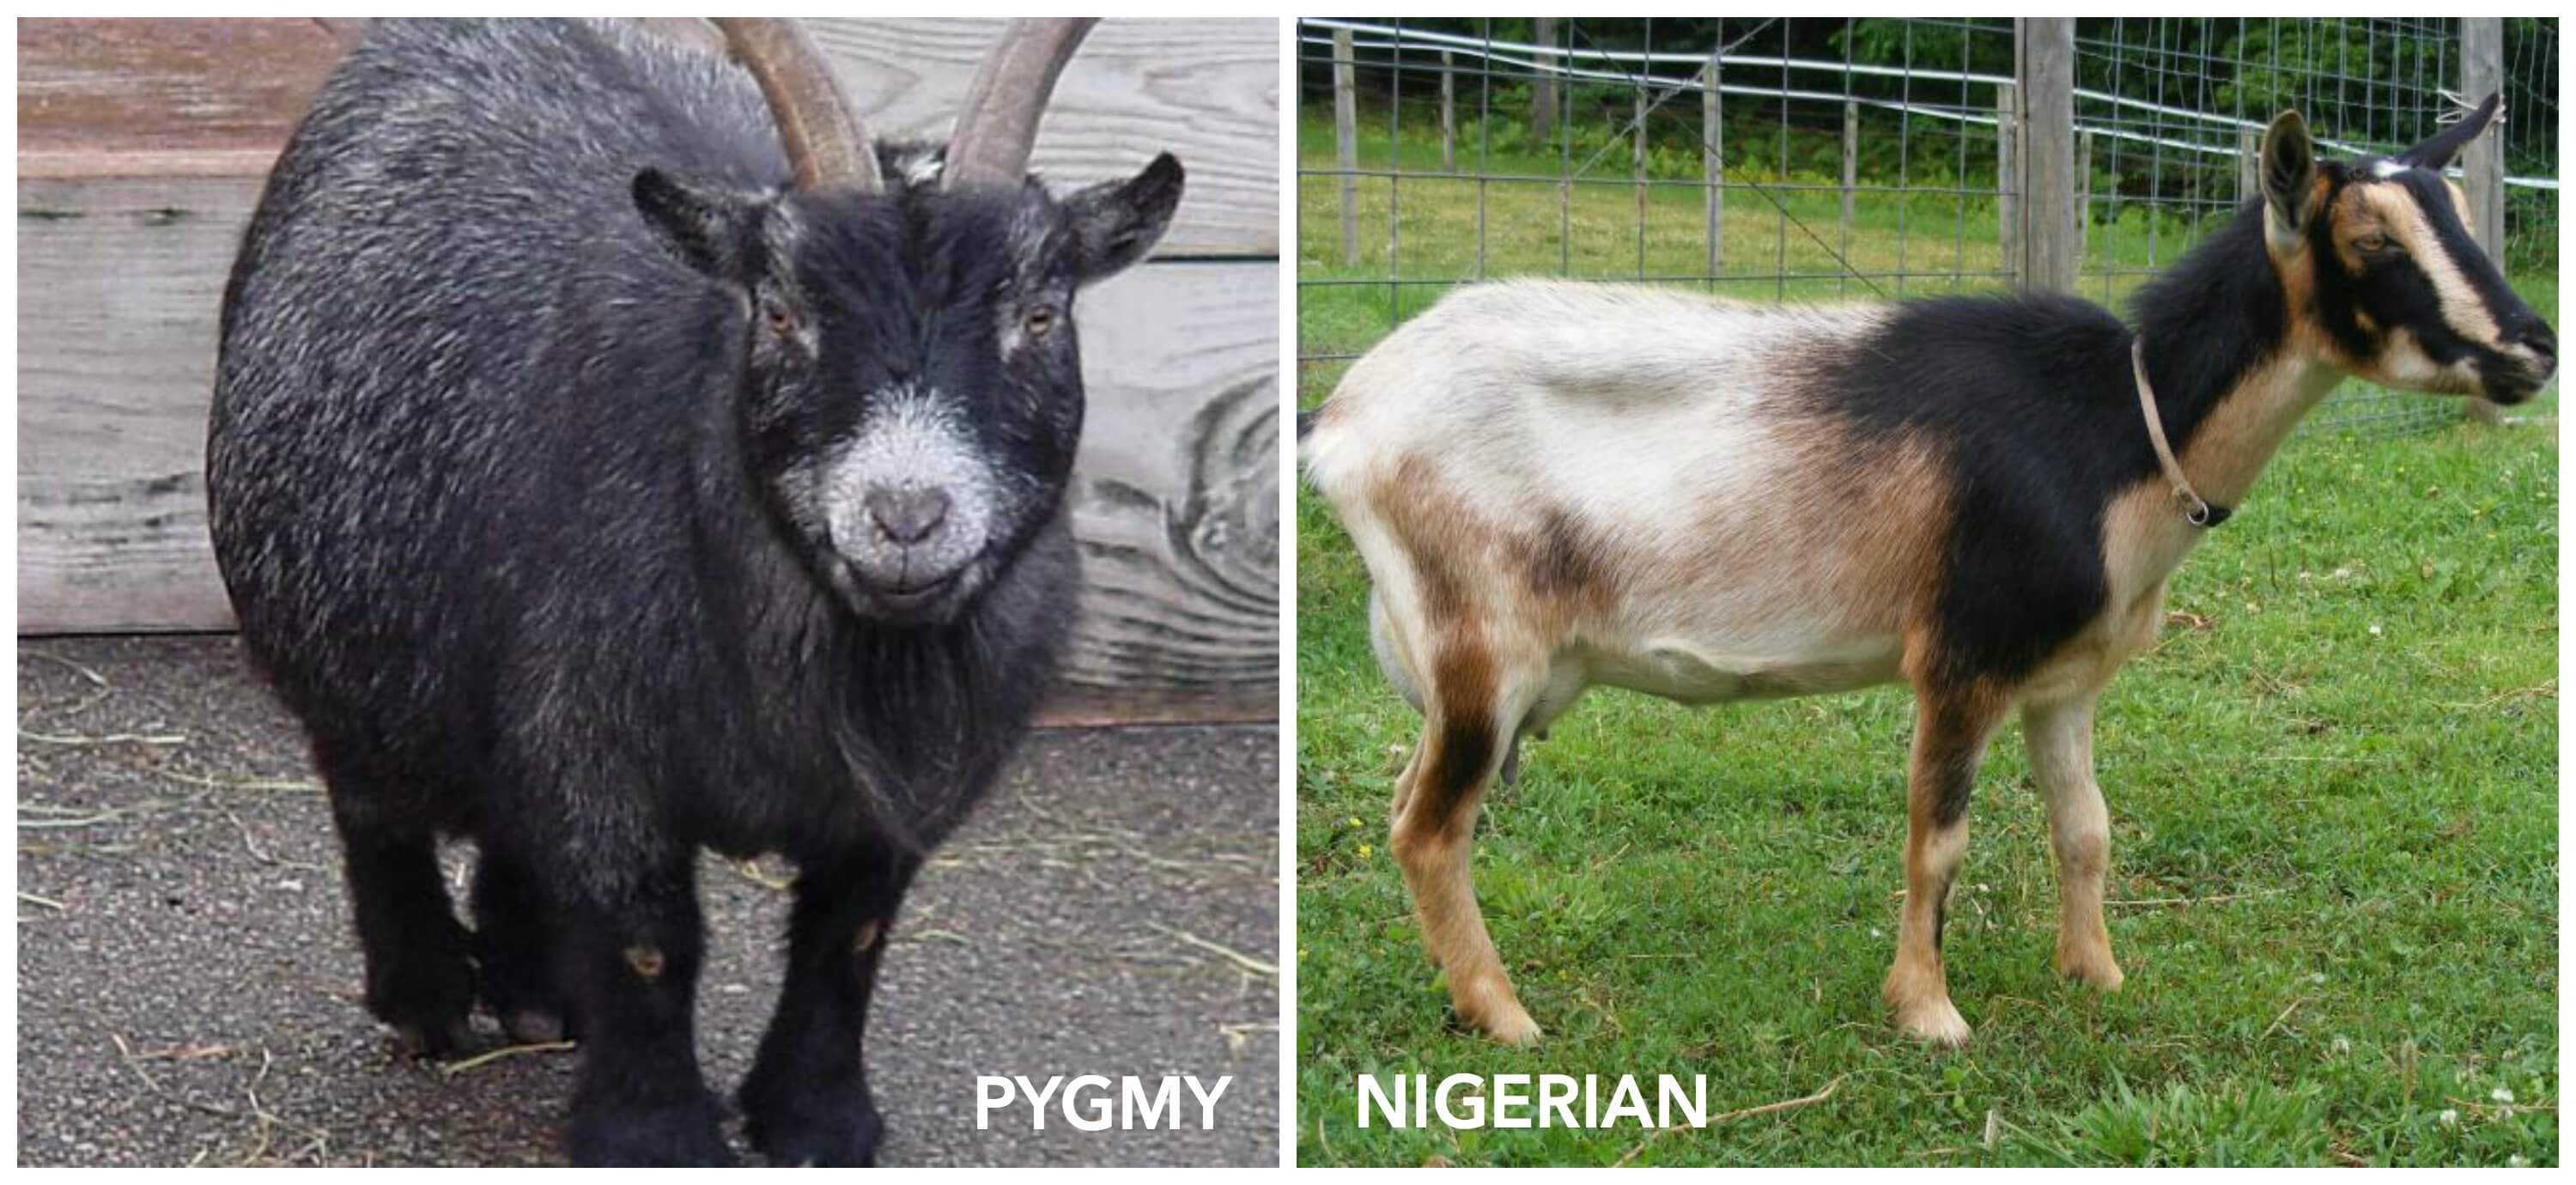 side by side comparison of pygmy and nigerian goats